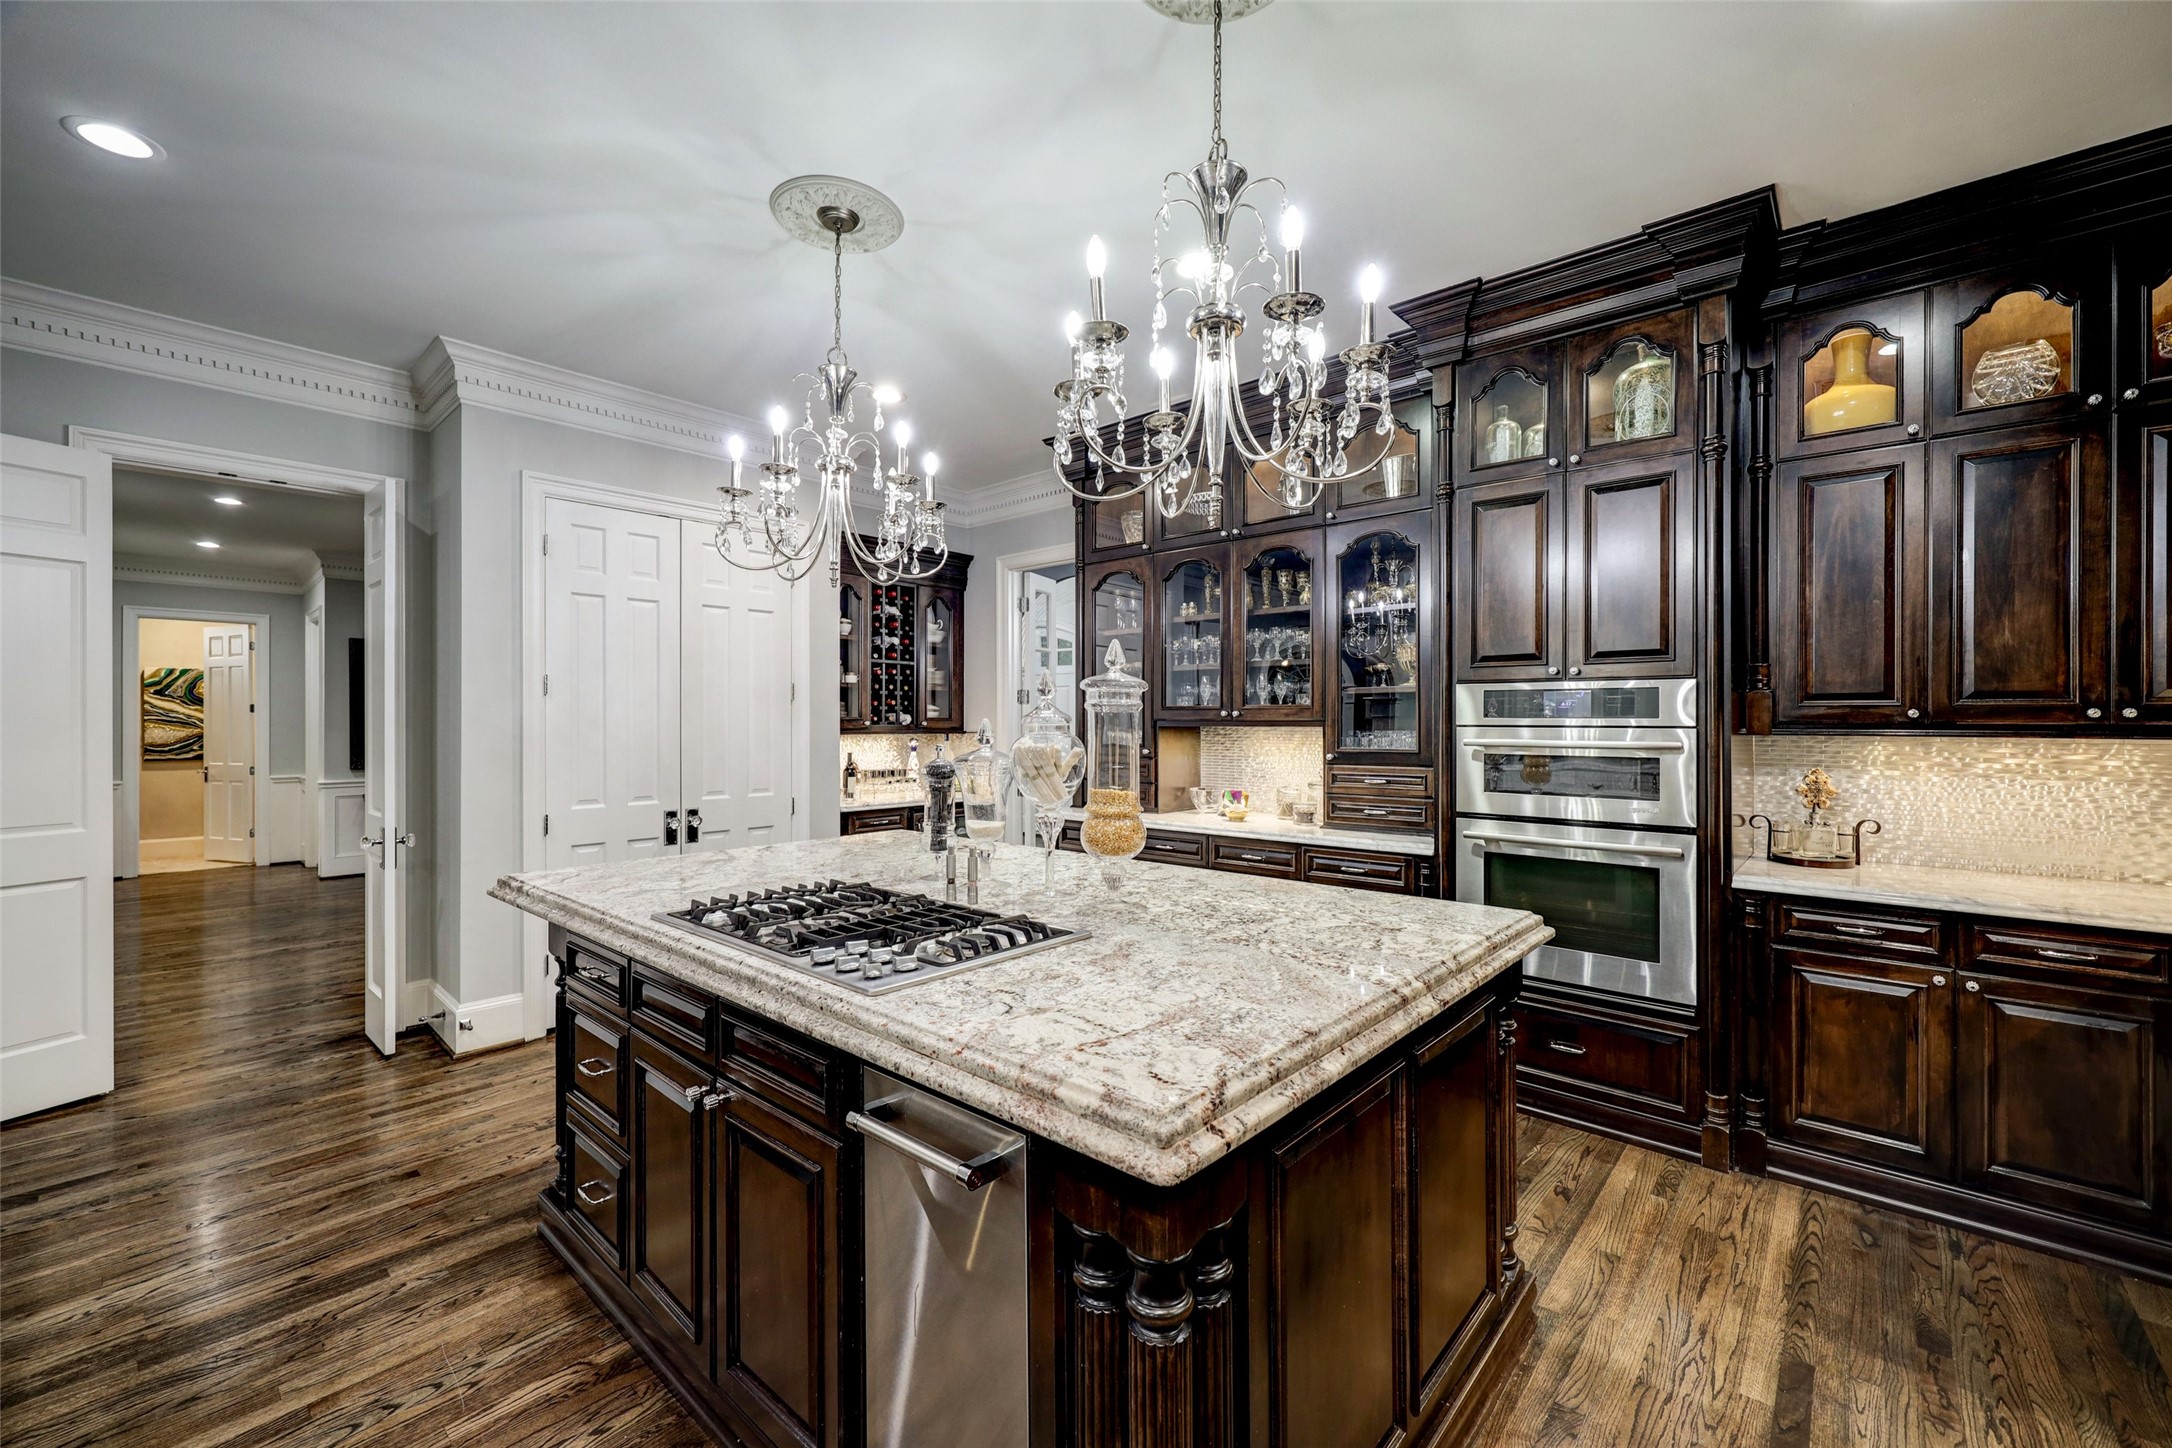 Elegant, timeless, and an inspired space to create inspired meals is the Kitchen. Within we have: a gas Range; Oven; Oven/Microwave combination; Butler's Pantry; a giant step-in Pantry; and miles and miles of countertops.